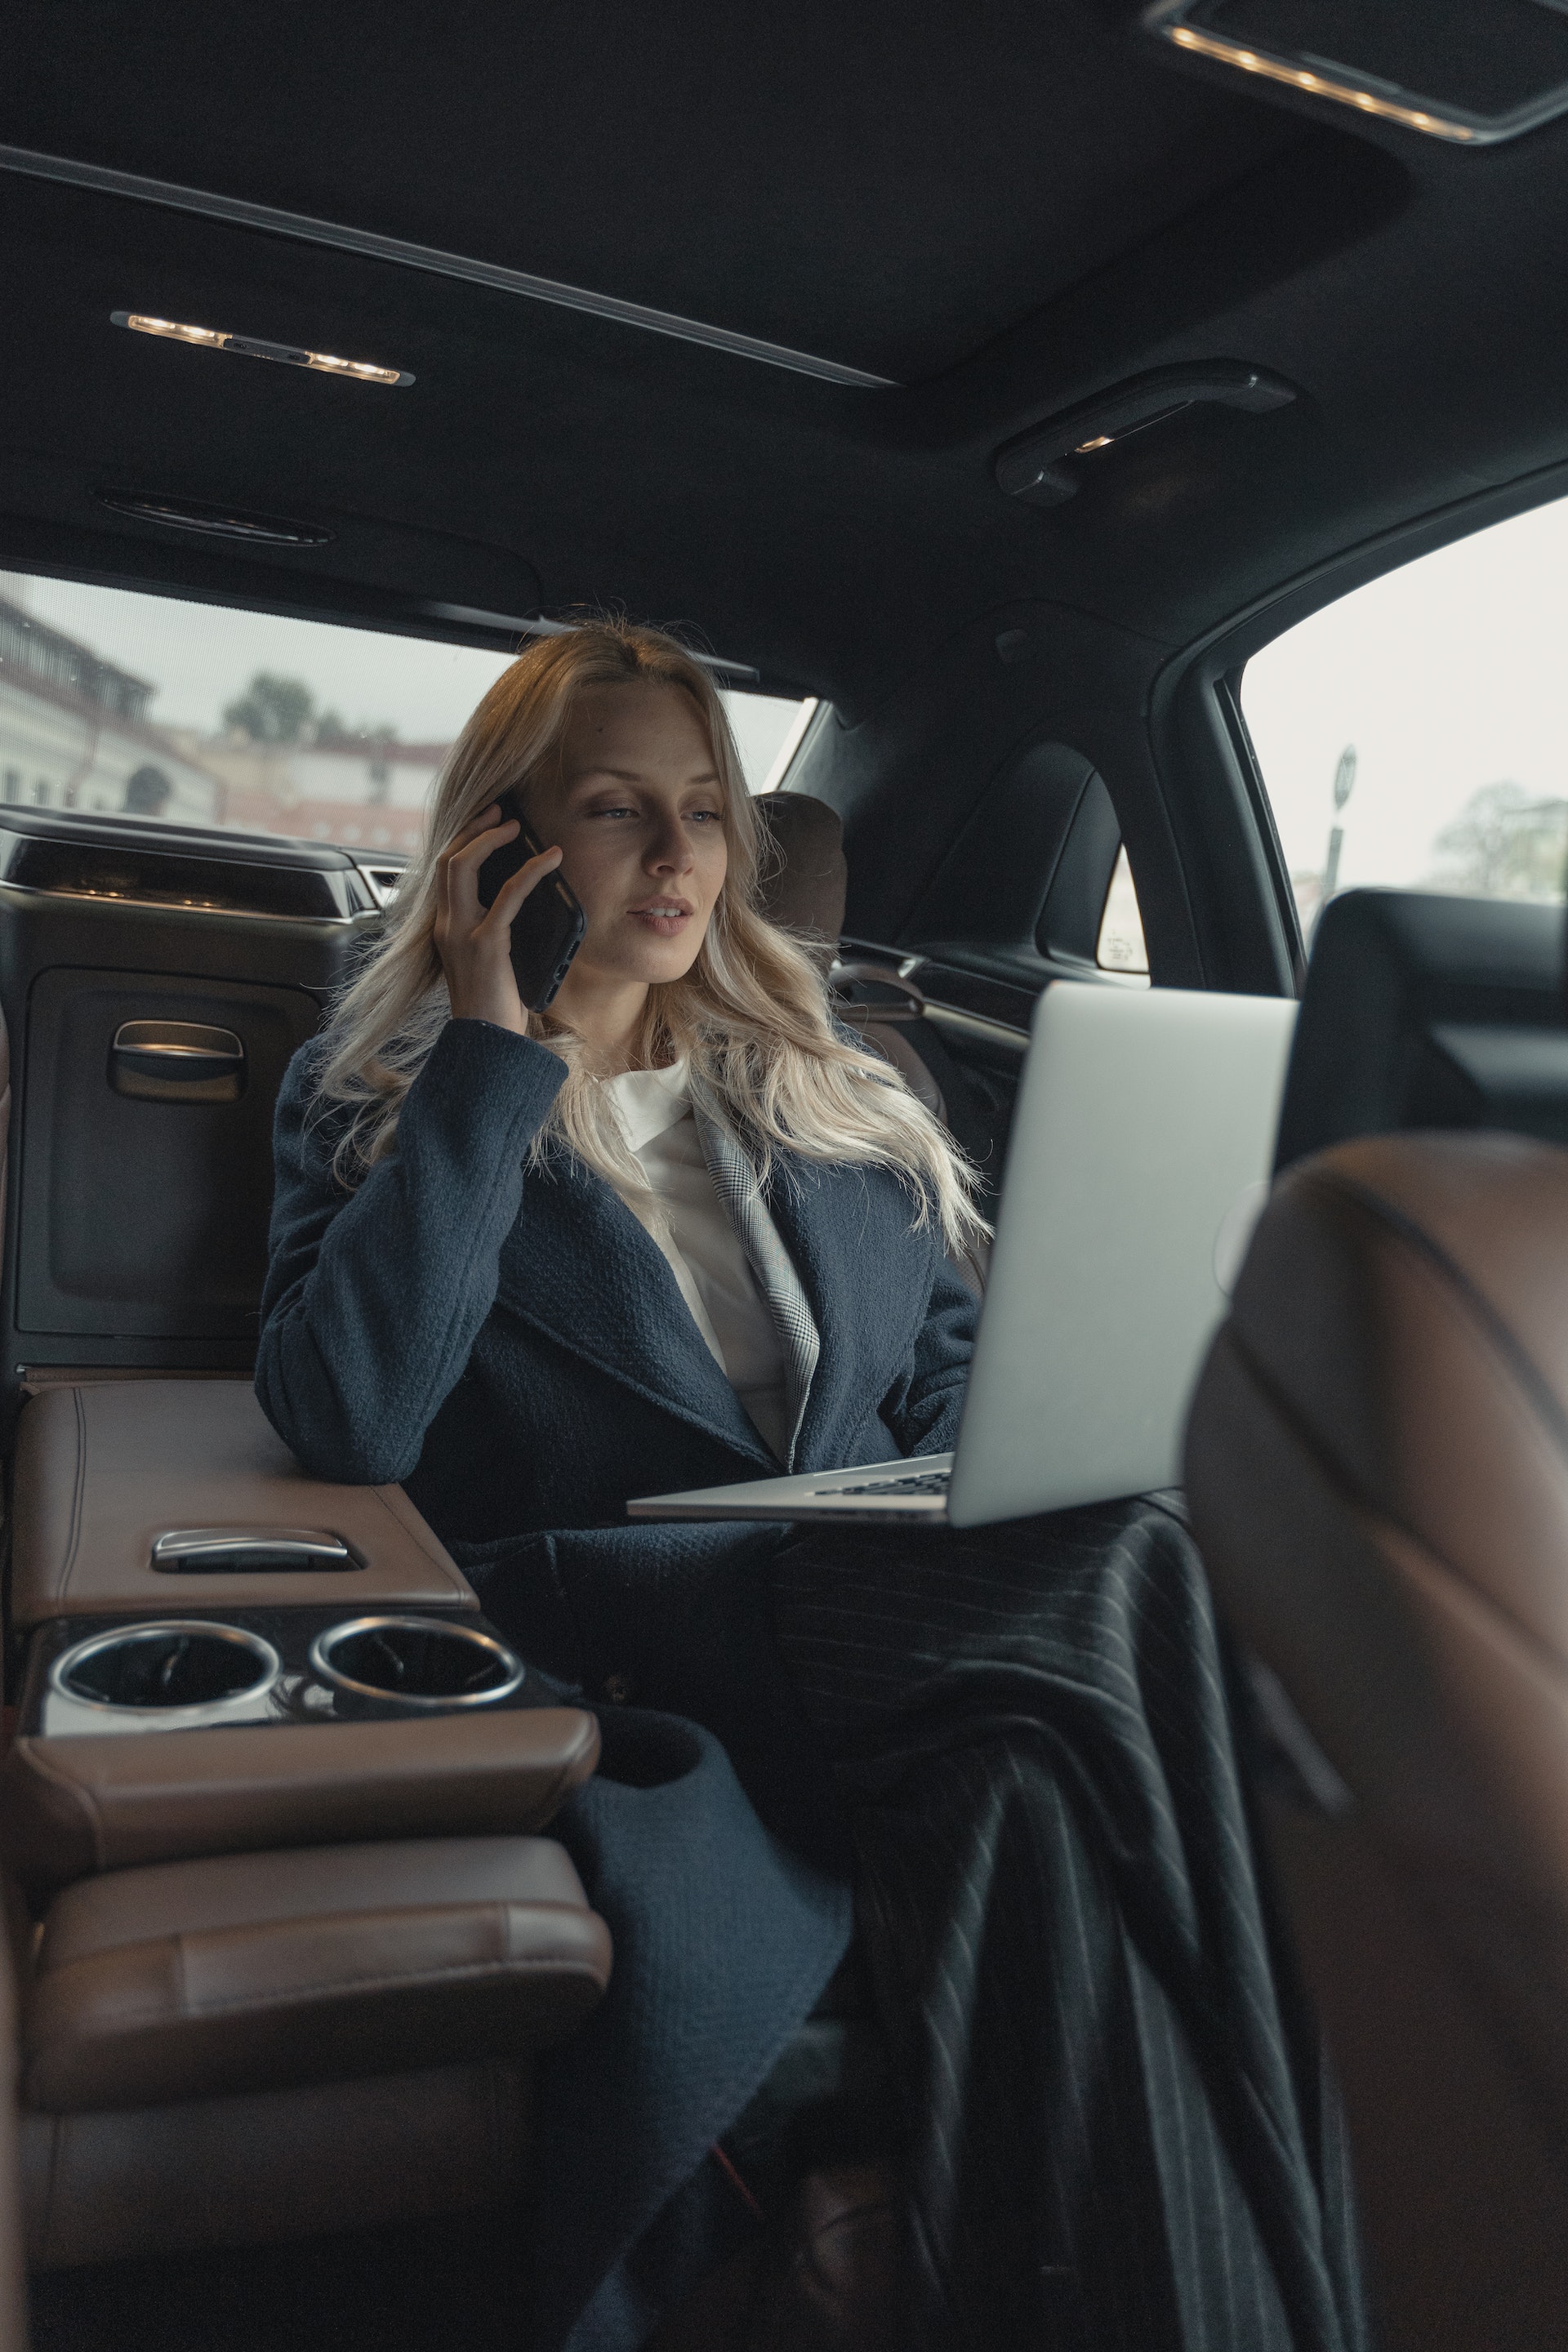 A woman working on a laptop in a car | Source: Pexels